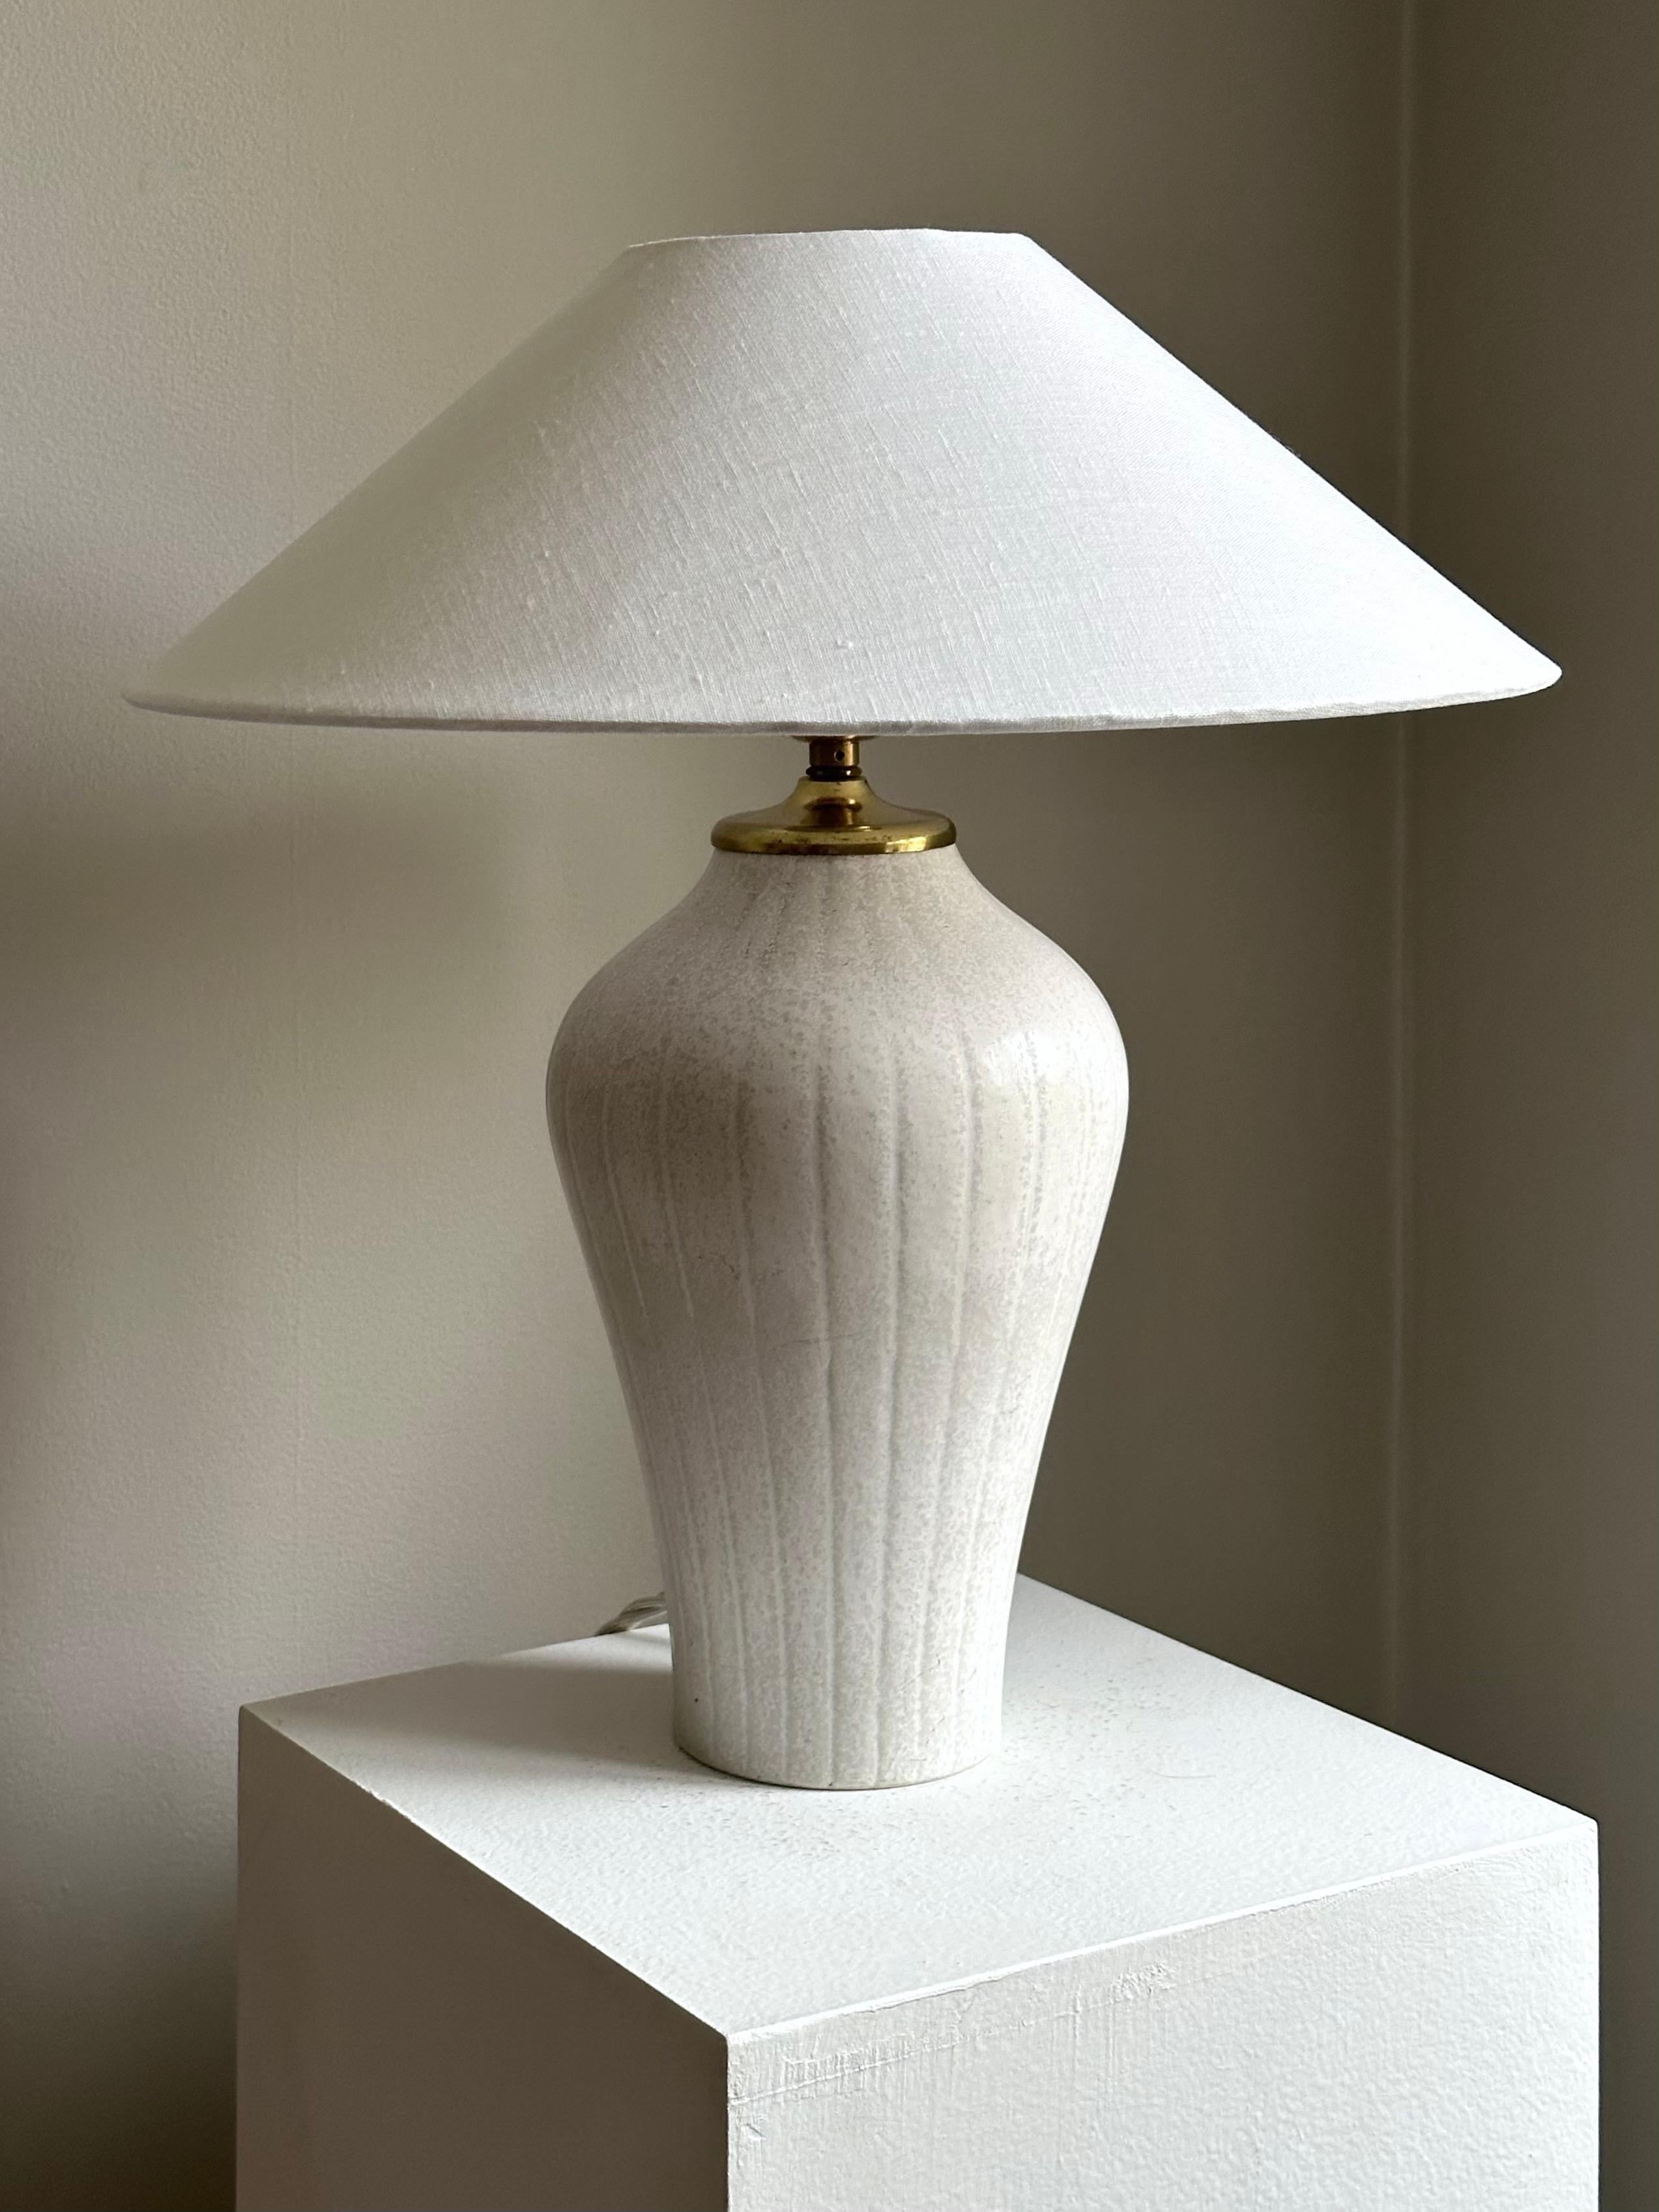 Elegant stoneware table lamp by Gunnar Nylund for Rörstrand, 1940s or 50s. Striped relief decor accenting the curved shape and a matte cream-white glaze with speckles. Marked 2nd factory sorting, likely due to a small defect in the glaze, see last